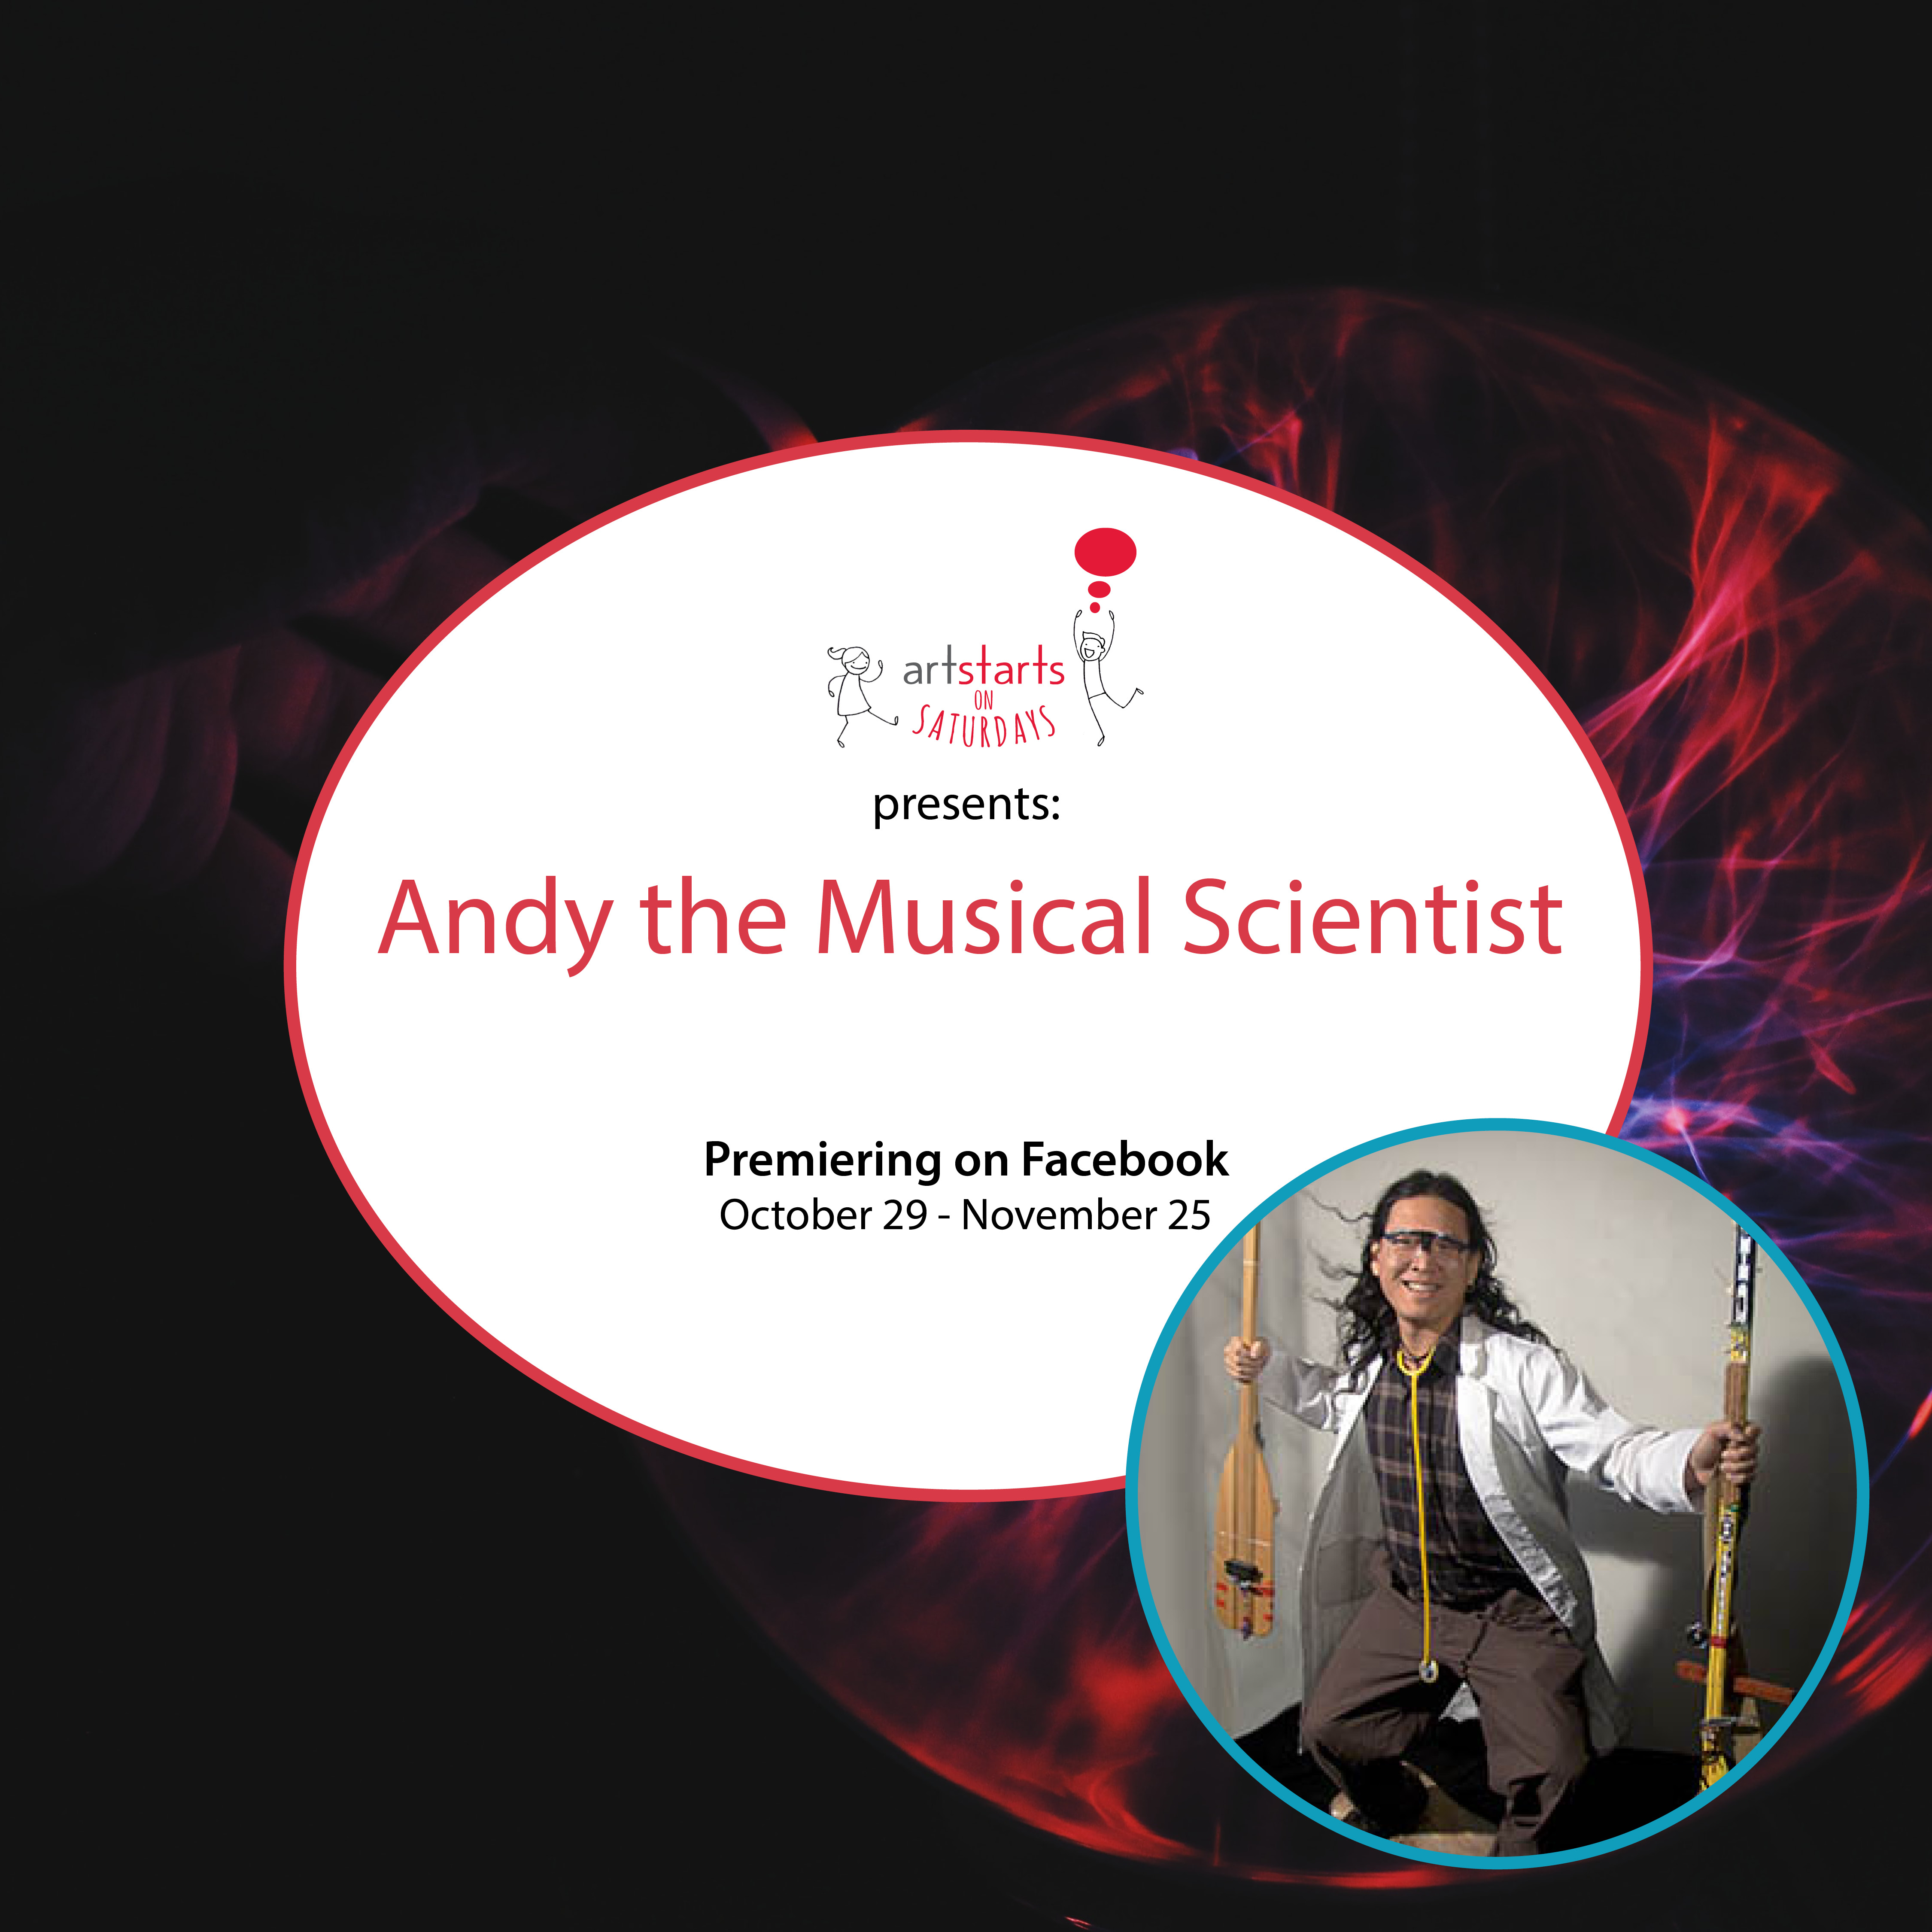 Andy the Musical Scientist